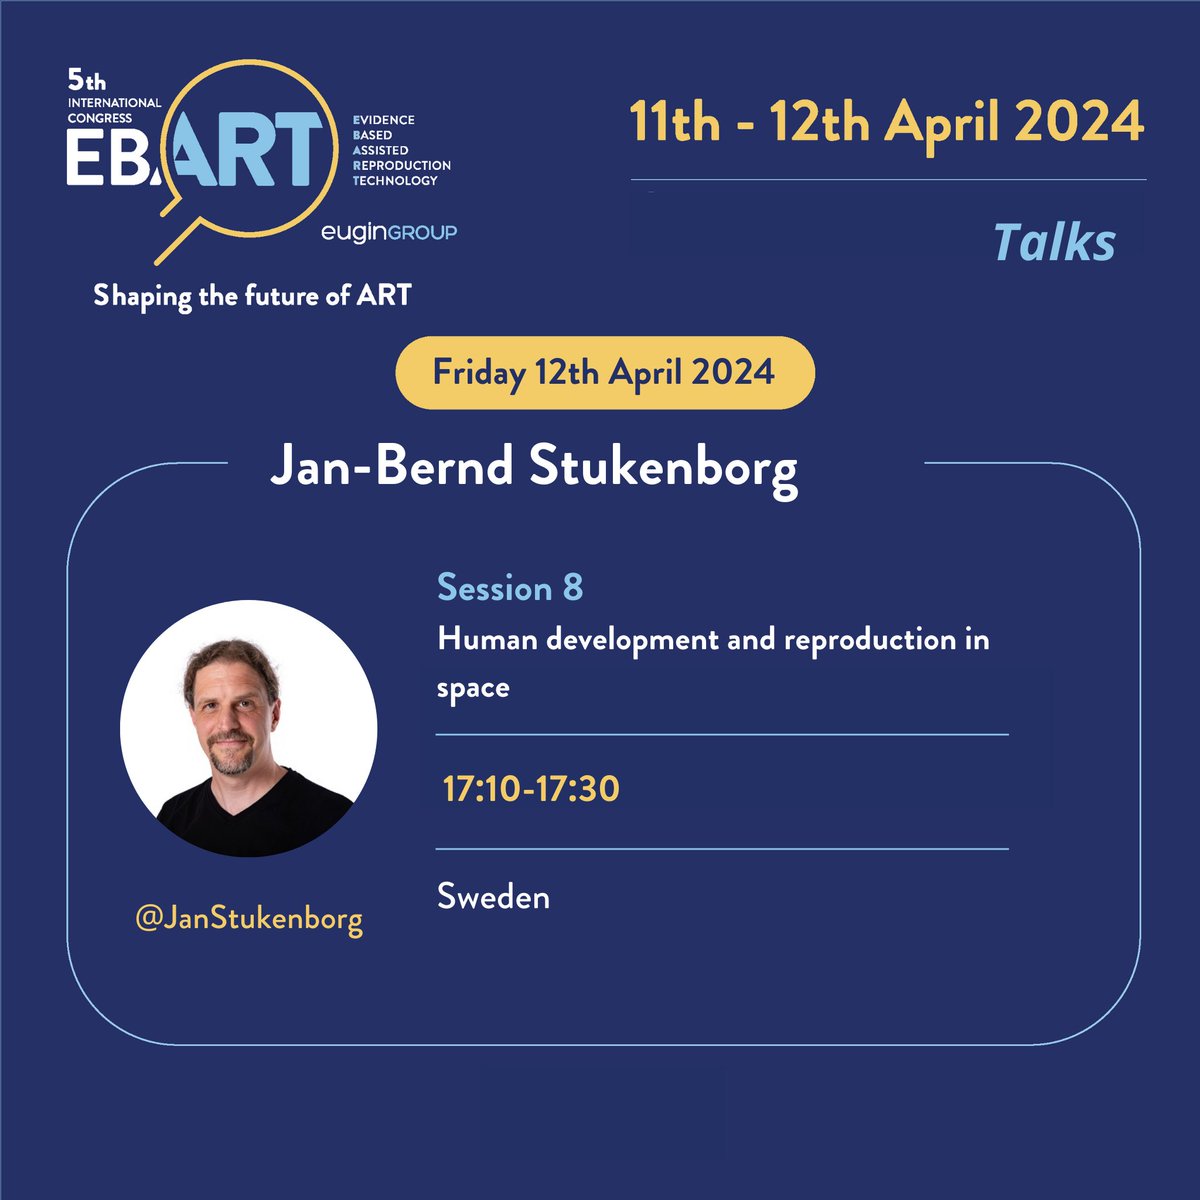 Dr. @JanStukenborg is giving the final talk of this edition of #EBART2024. He is presenting a special and fascinating topic titled 'Human development and reproduction in space' 🪐 Thank you once again for your contribution, Dr. Stukenborg!'🙏🏼‼️